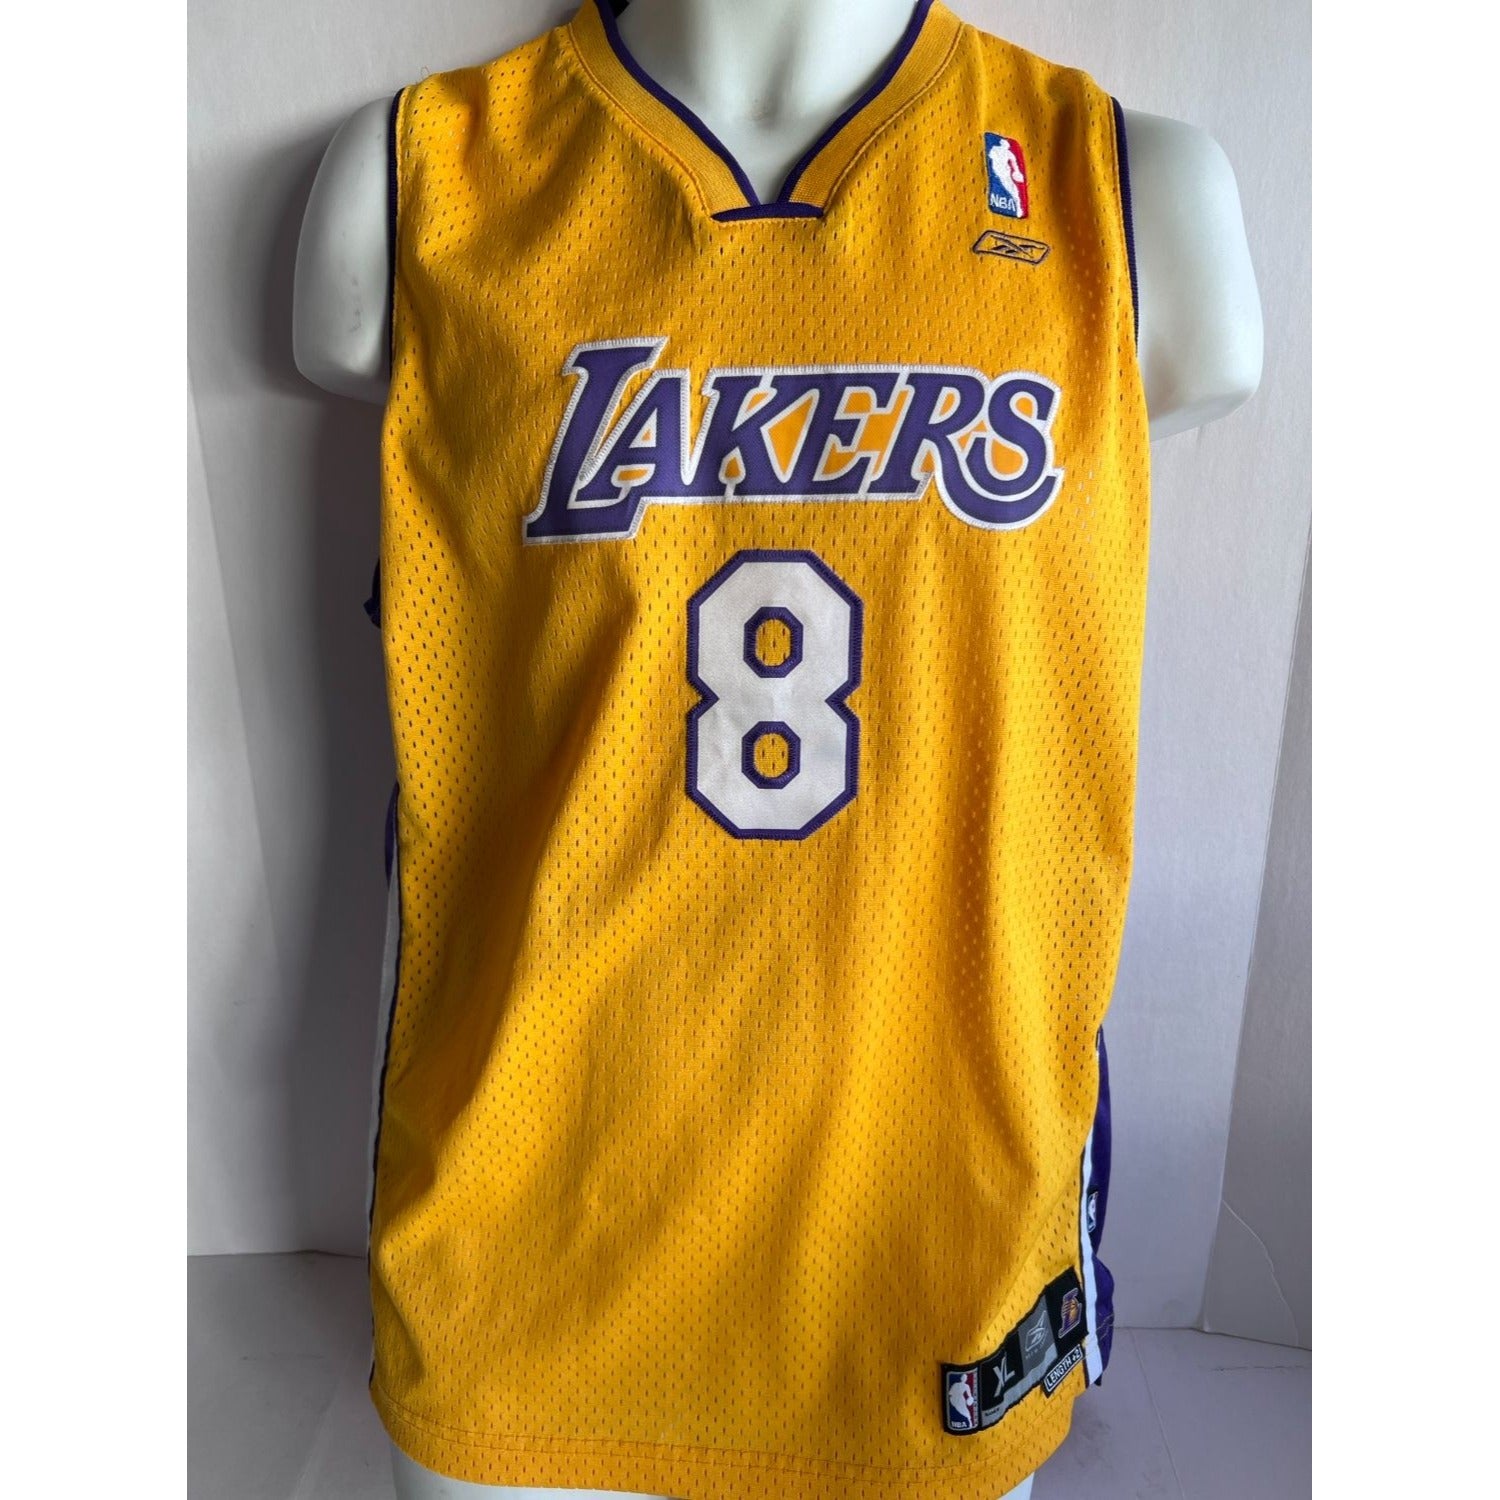 Kobe Bryant vintage Nike size large game model Jersey signed with proof